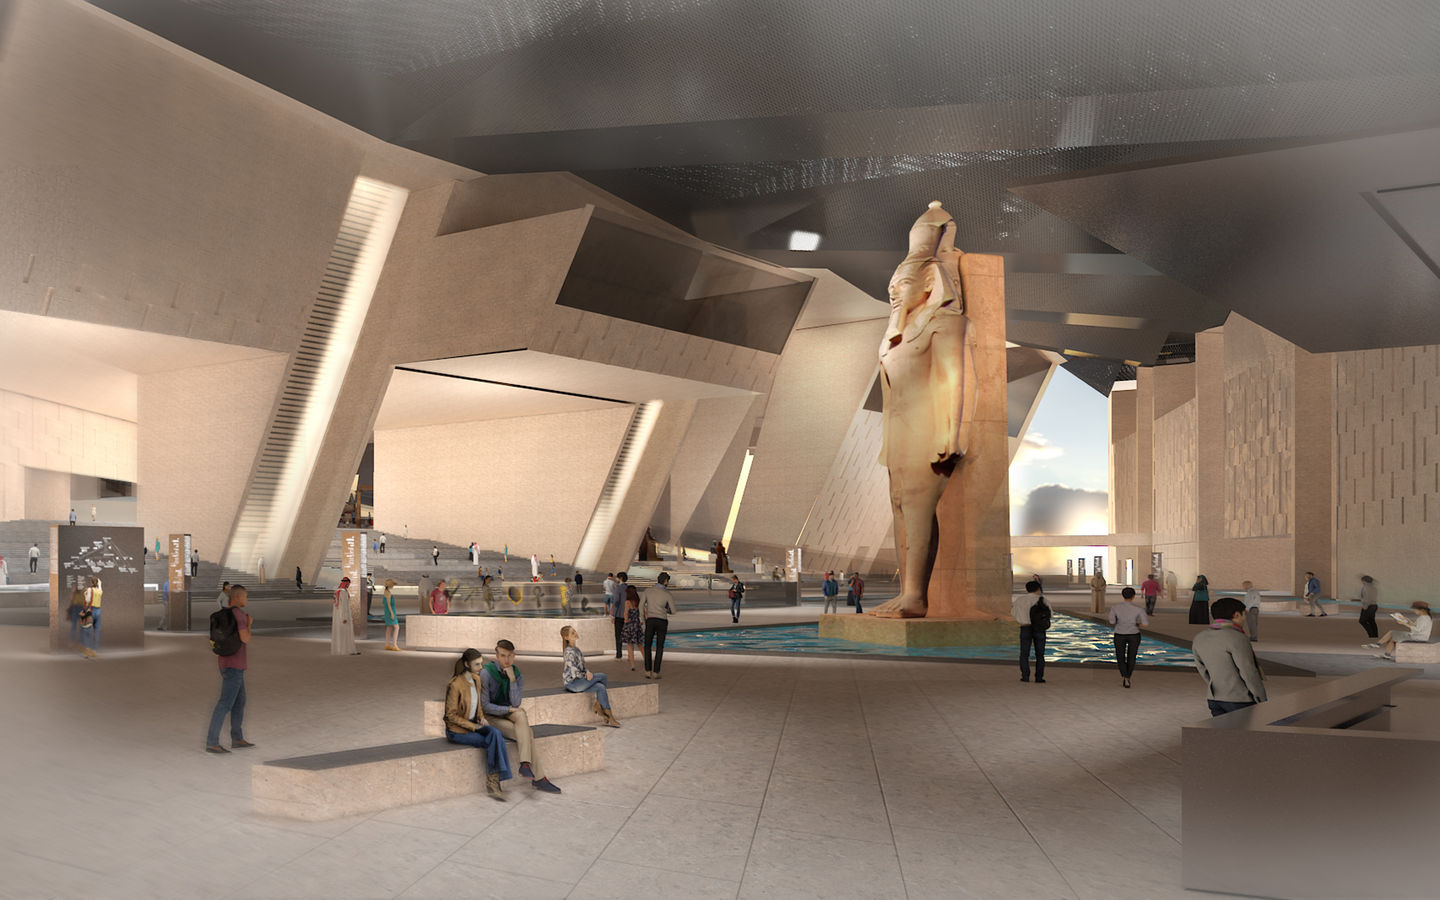 The Great Egyptian Museum will feature the world's first hanging obelisk